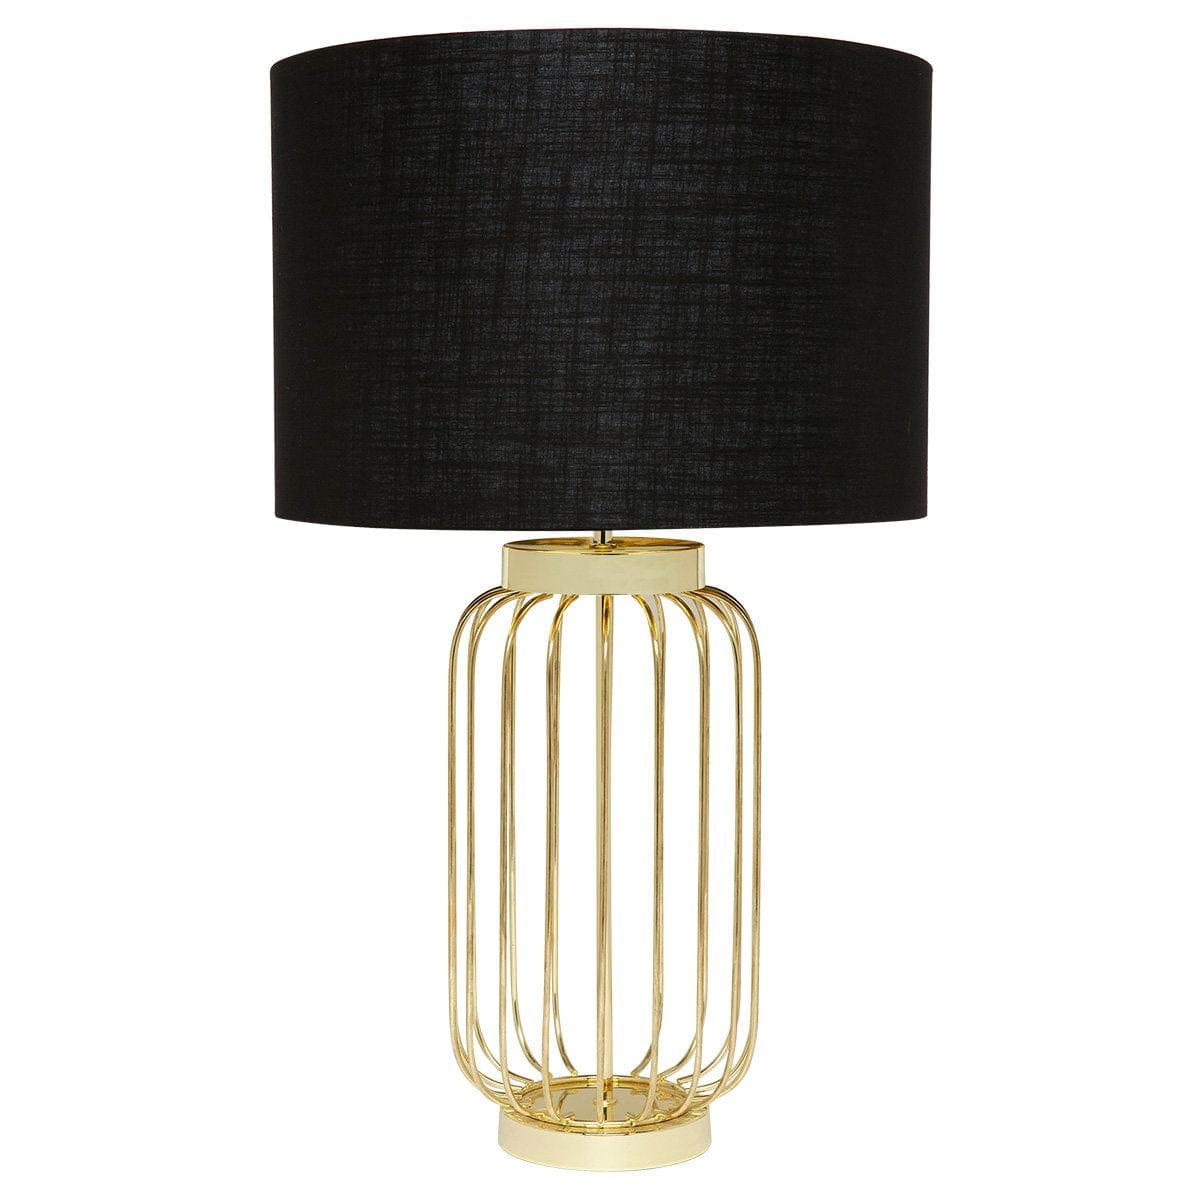 CAFE LIGHTING & LIVING Table Lamp Cleo Table Lamp - Gold 11563